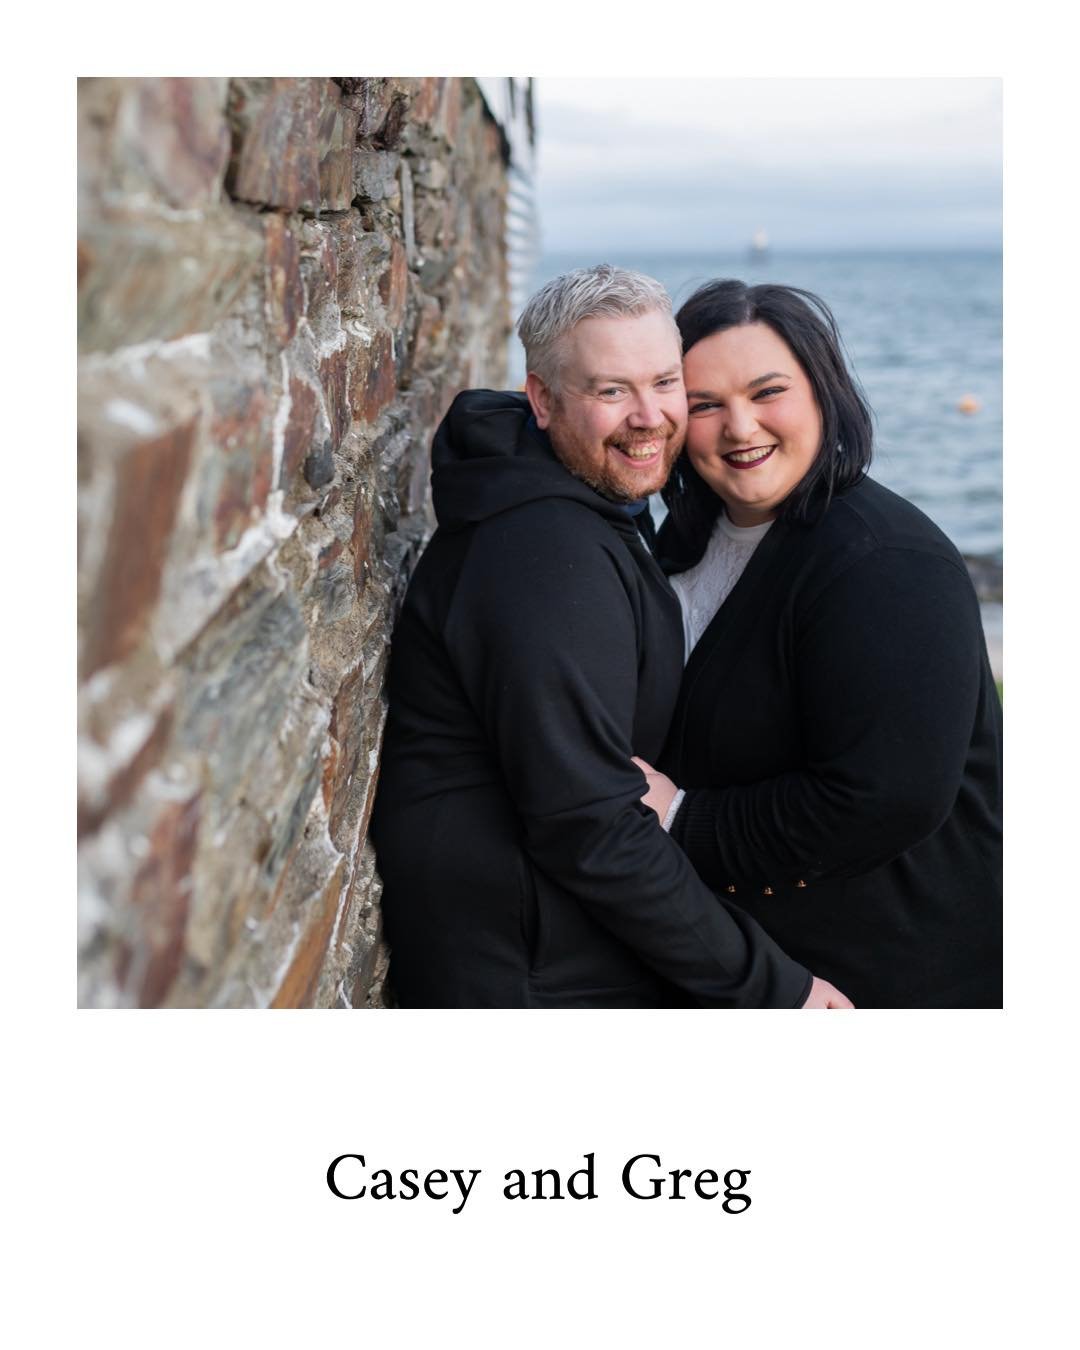 Looking forward to tomorrow&rsquo;s wedding with Casey and Greg. 
I recently caught up with them to do a pre-wedding shoot in Moville, which was alot of fun. I think we spent most of the session just laughing, so here&rsquo;s a few images in between 